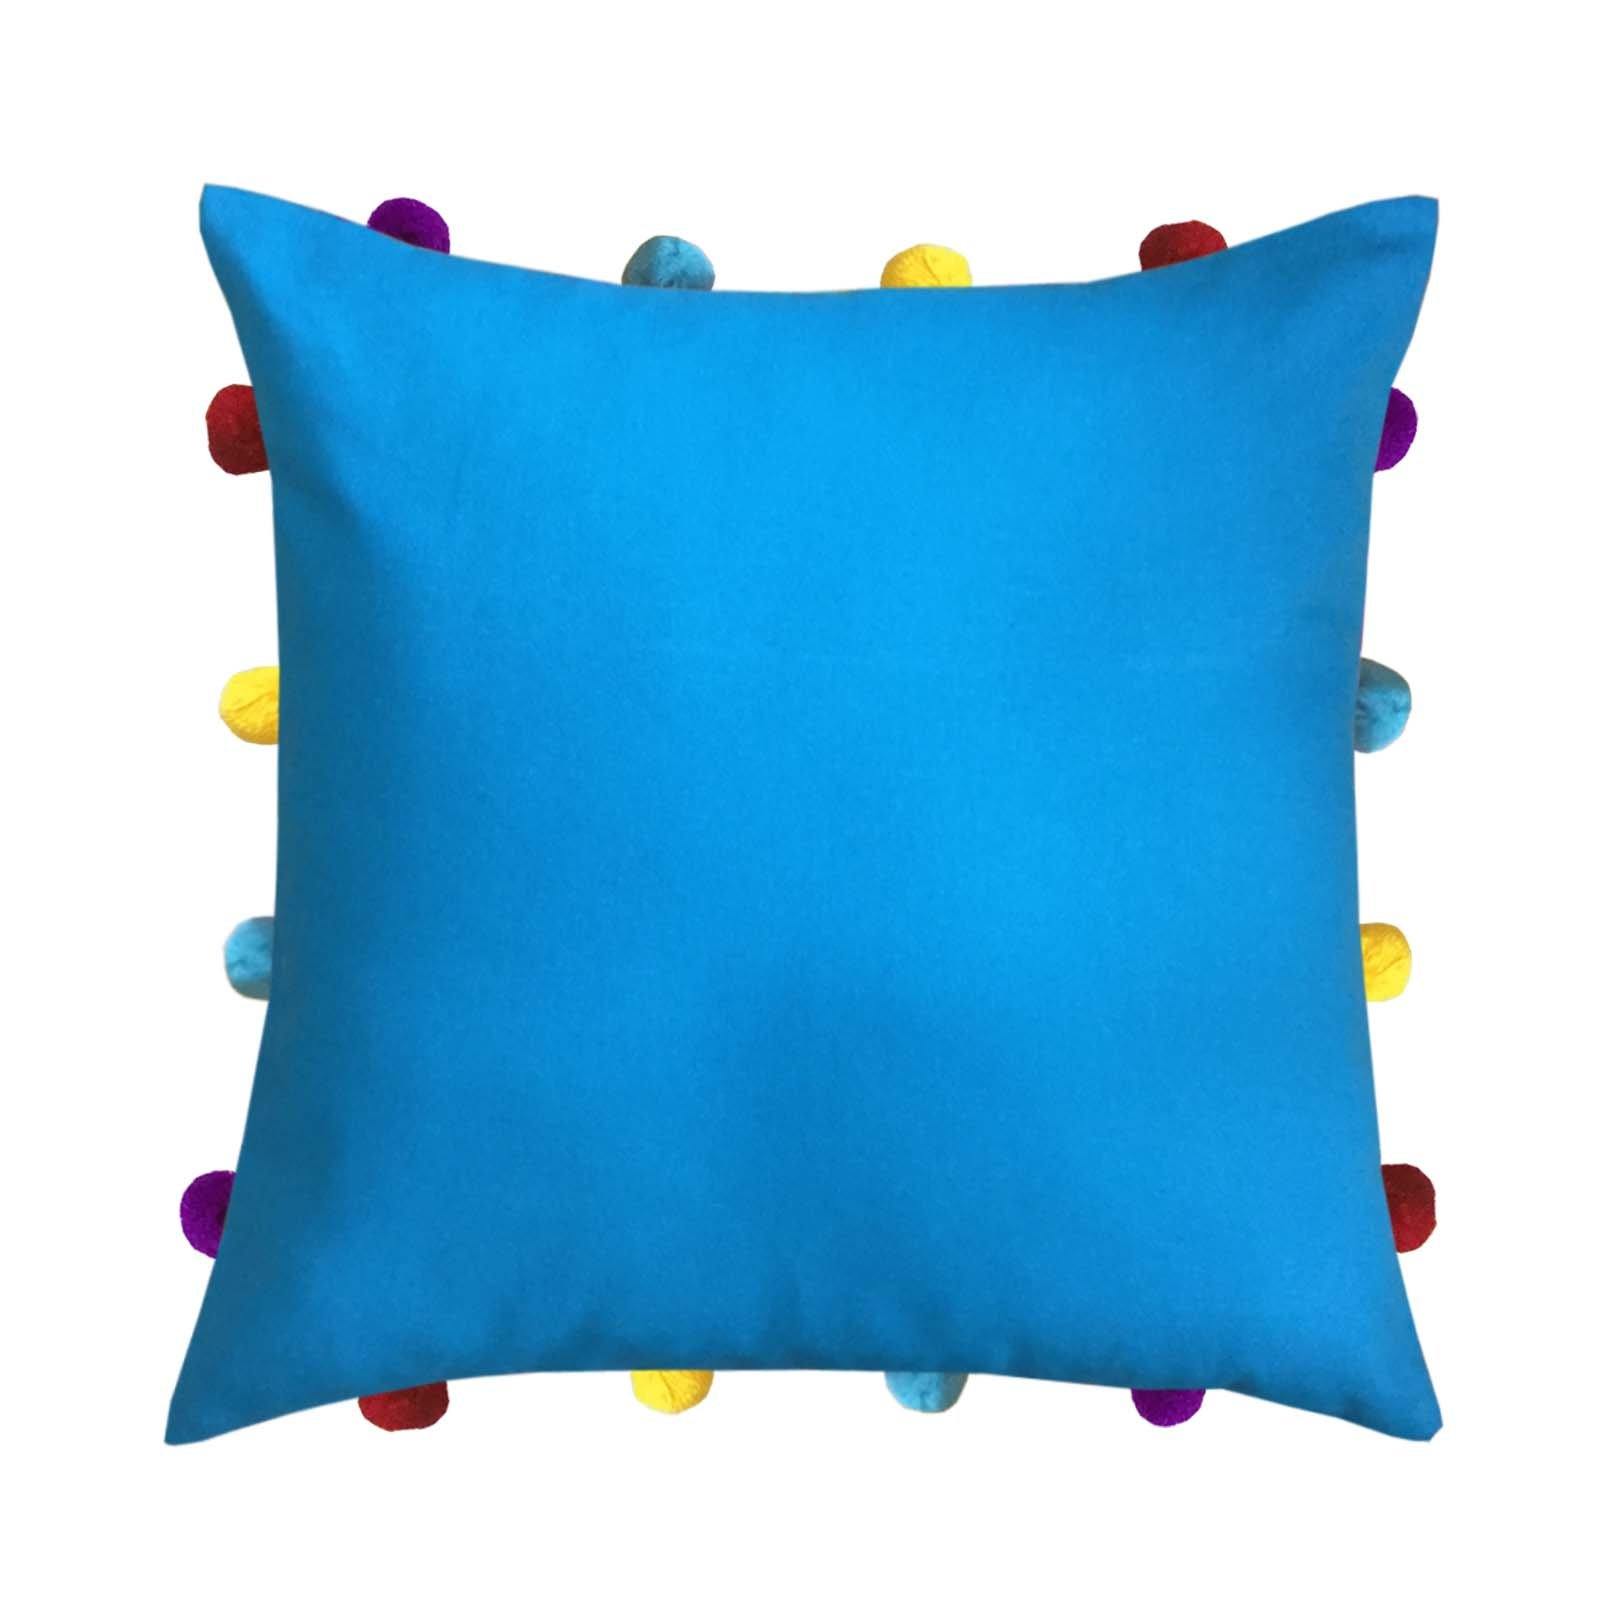 Lushomes Blue Sofa Cushion Cover Online with Colorful Pom Pom (Pack of 1 pc, 14 x 14 inches) - Lushomes